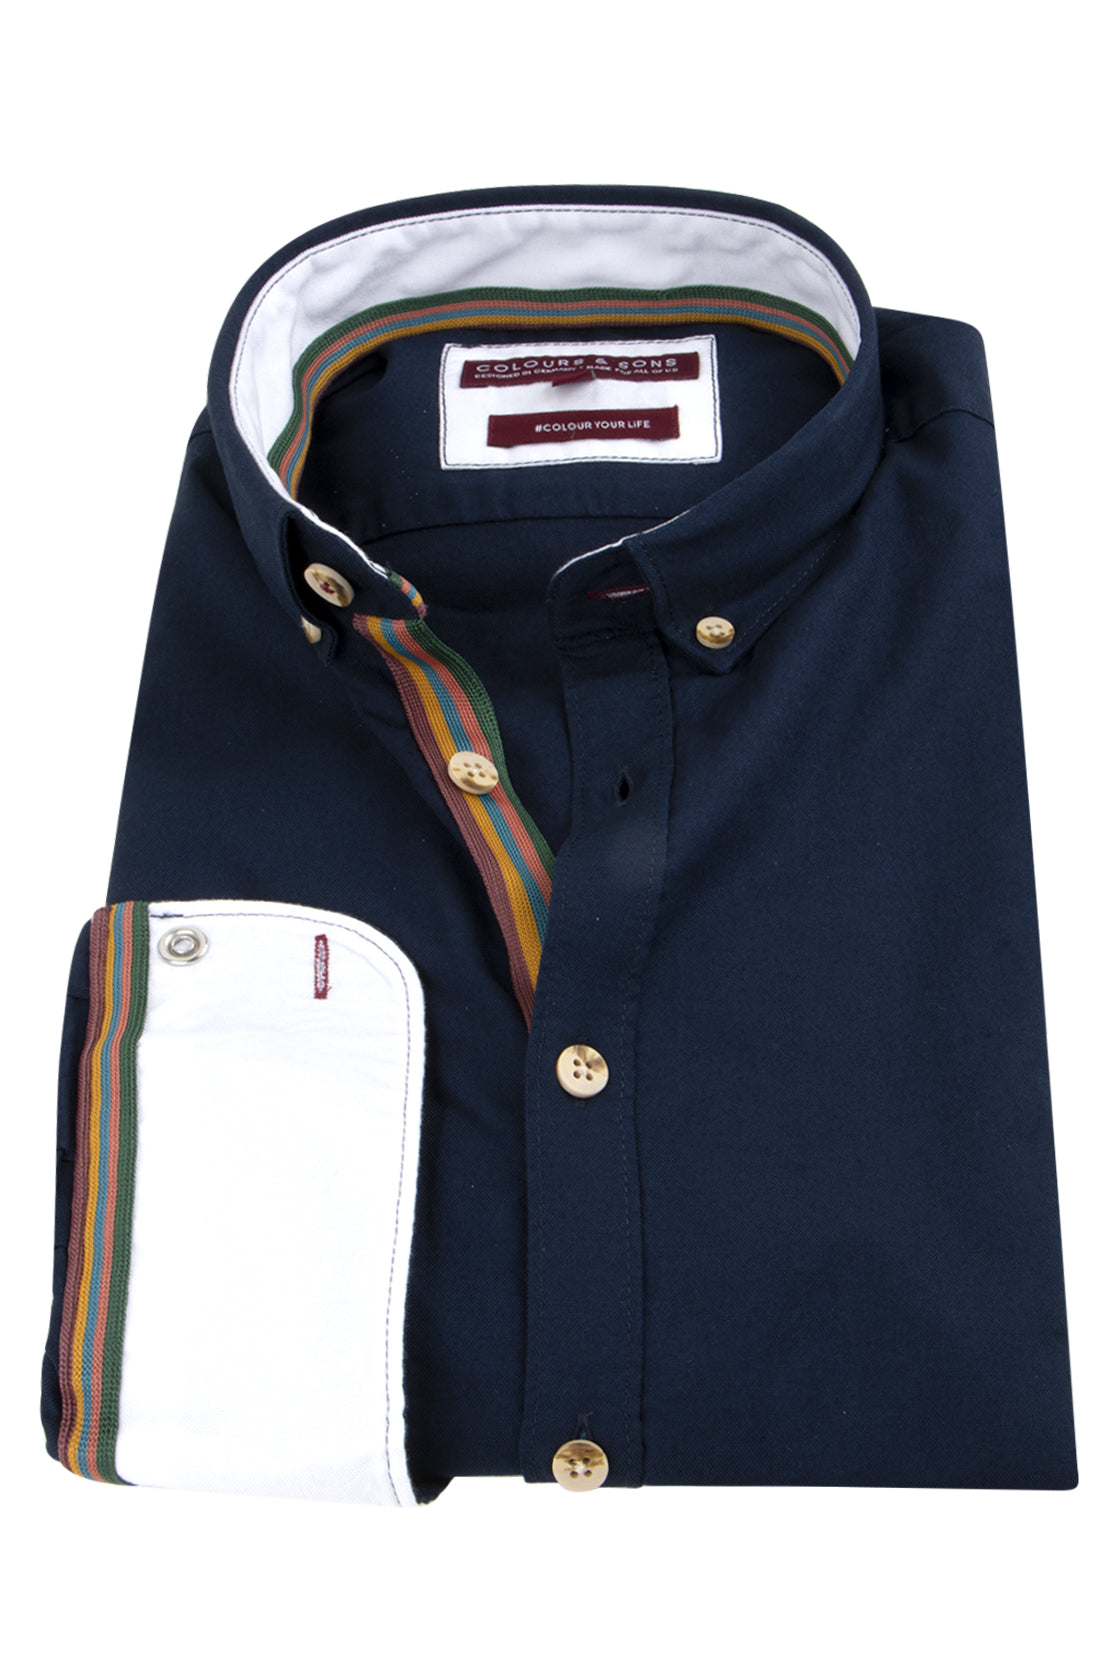 Colours & Sons Casual Shirt Navy